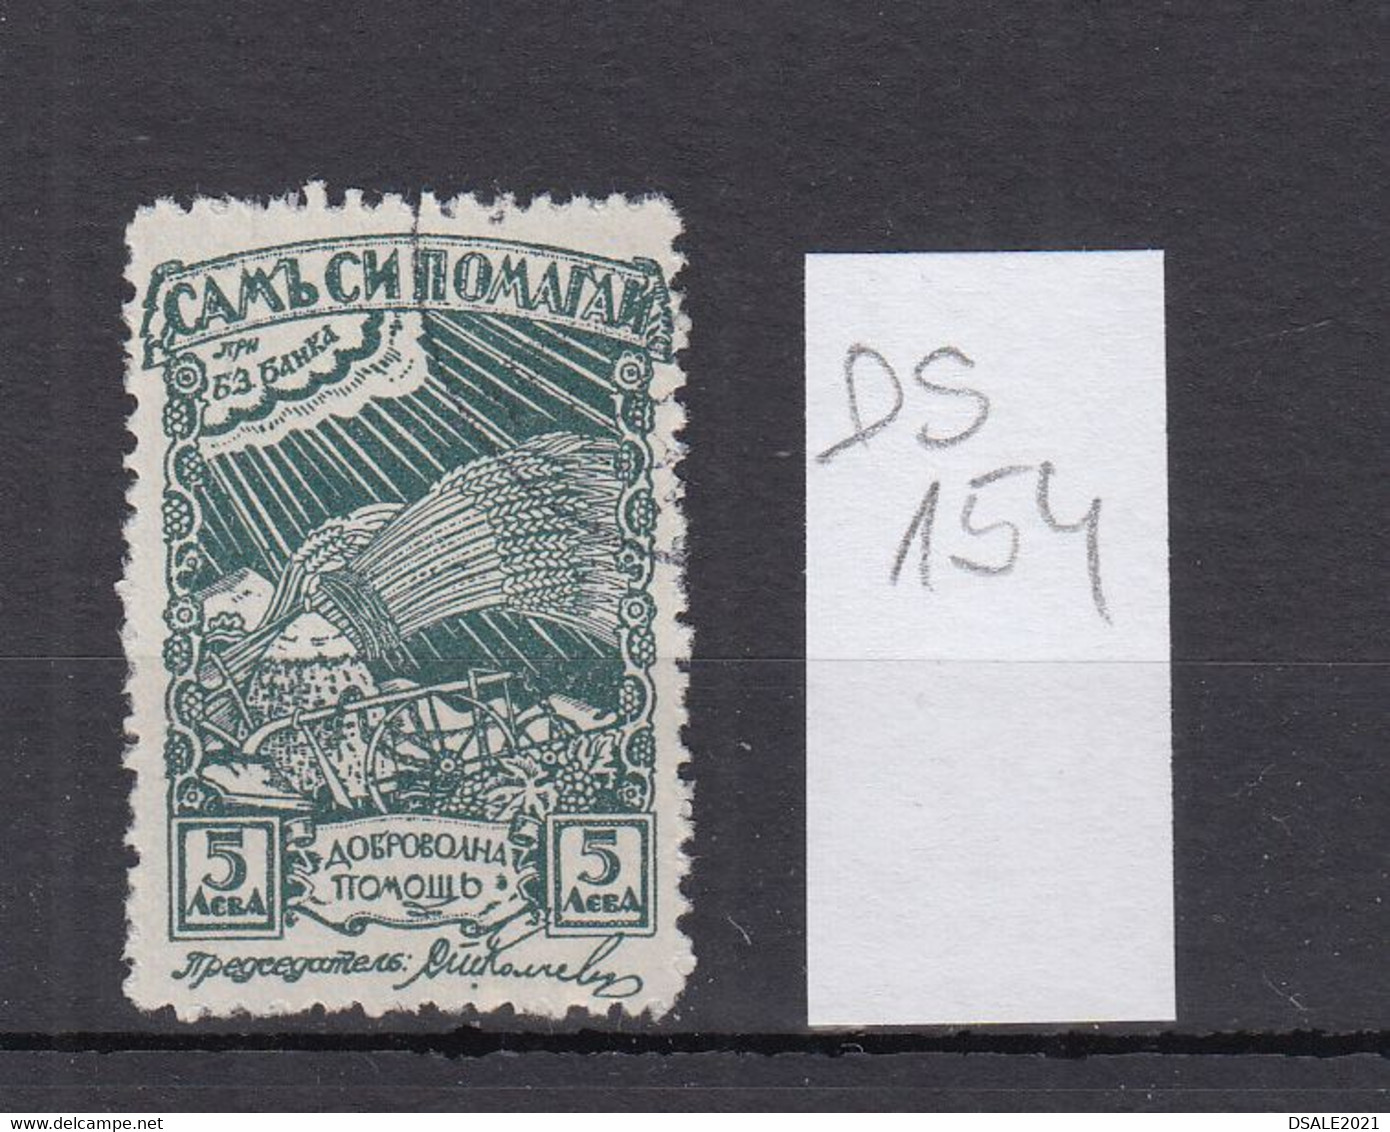 Bulgaria Bulgarie Bulgarije 1930s Agricultural Bank 5Lv. Fund Self Help Fiscal Revenue Stamp Bulgarian (ds154) - Official Stamps